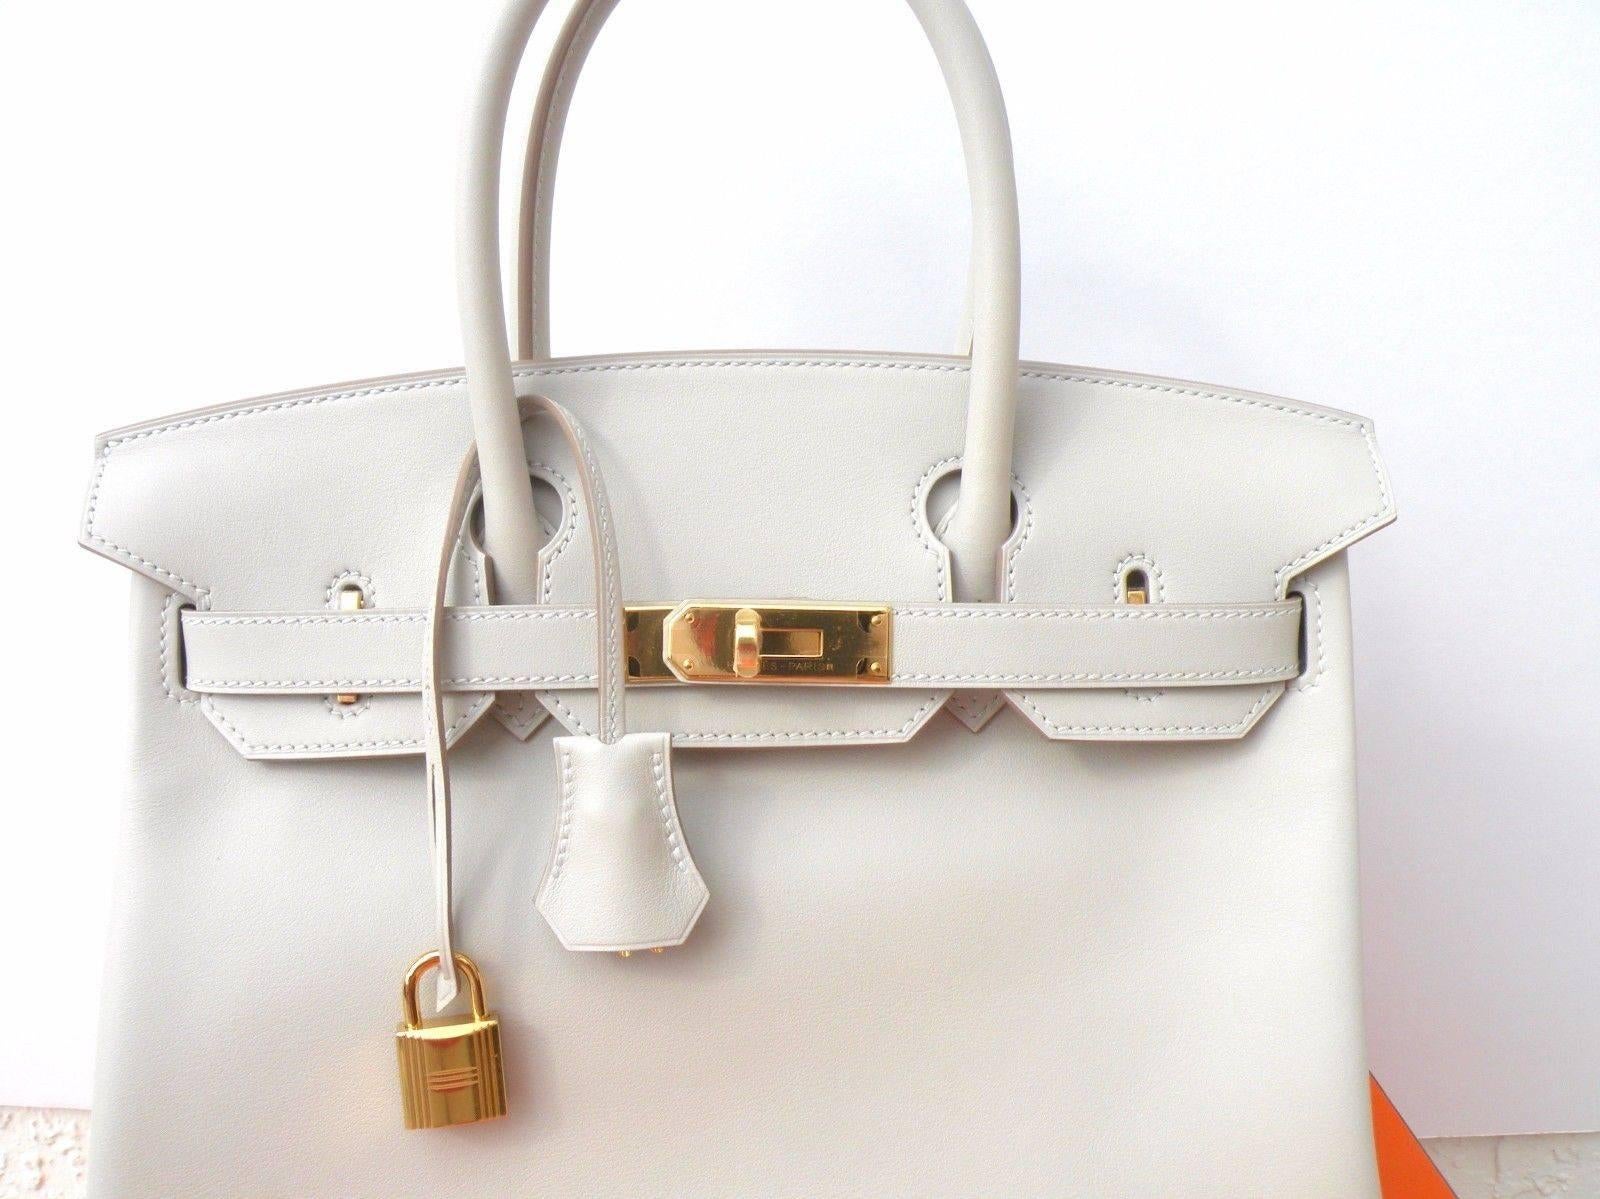 Hermes Birkin 30 Gris Perle Gold Hardware In New Condition For Sale In West Chester, PA